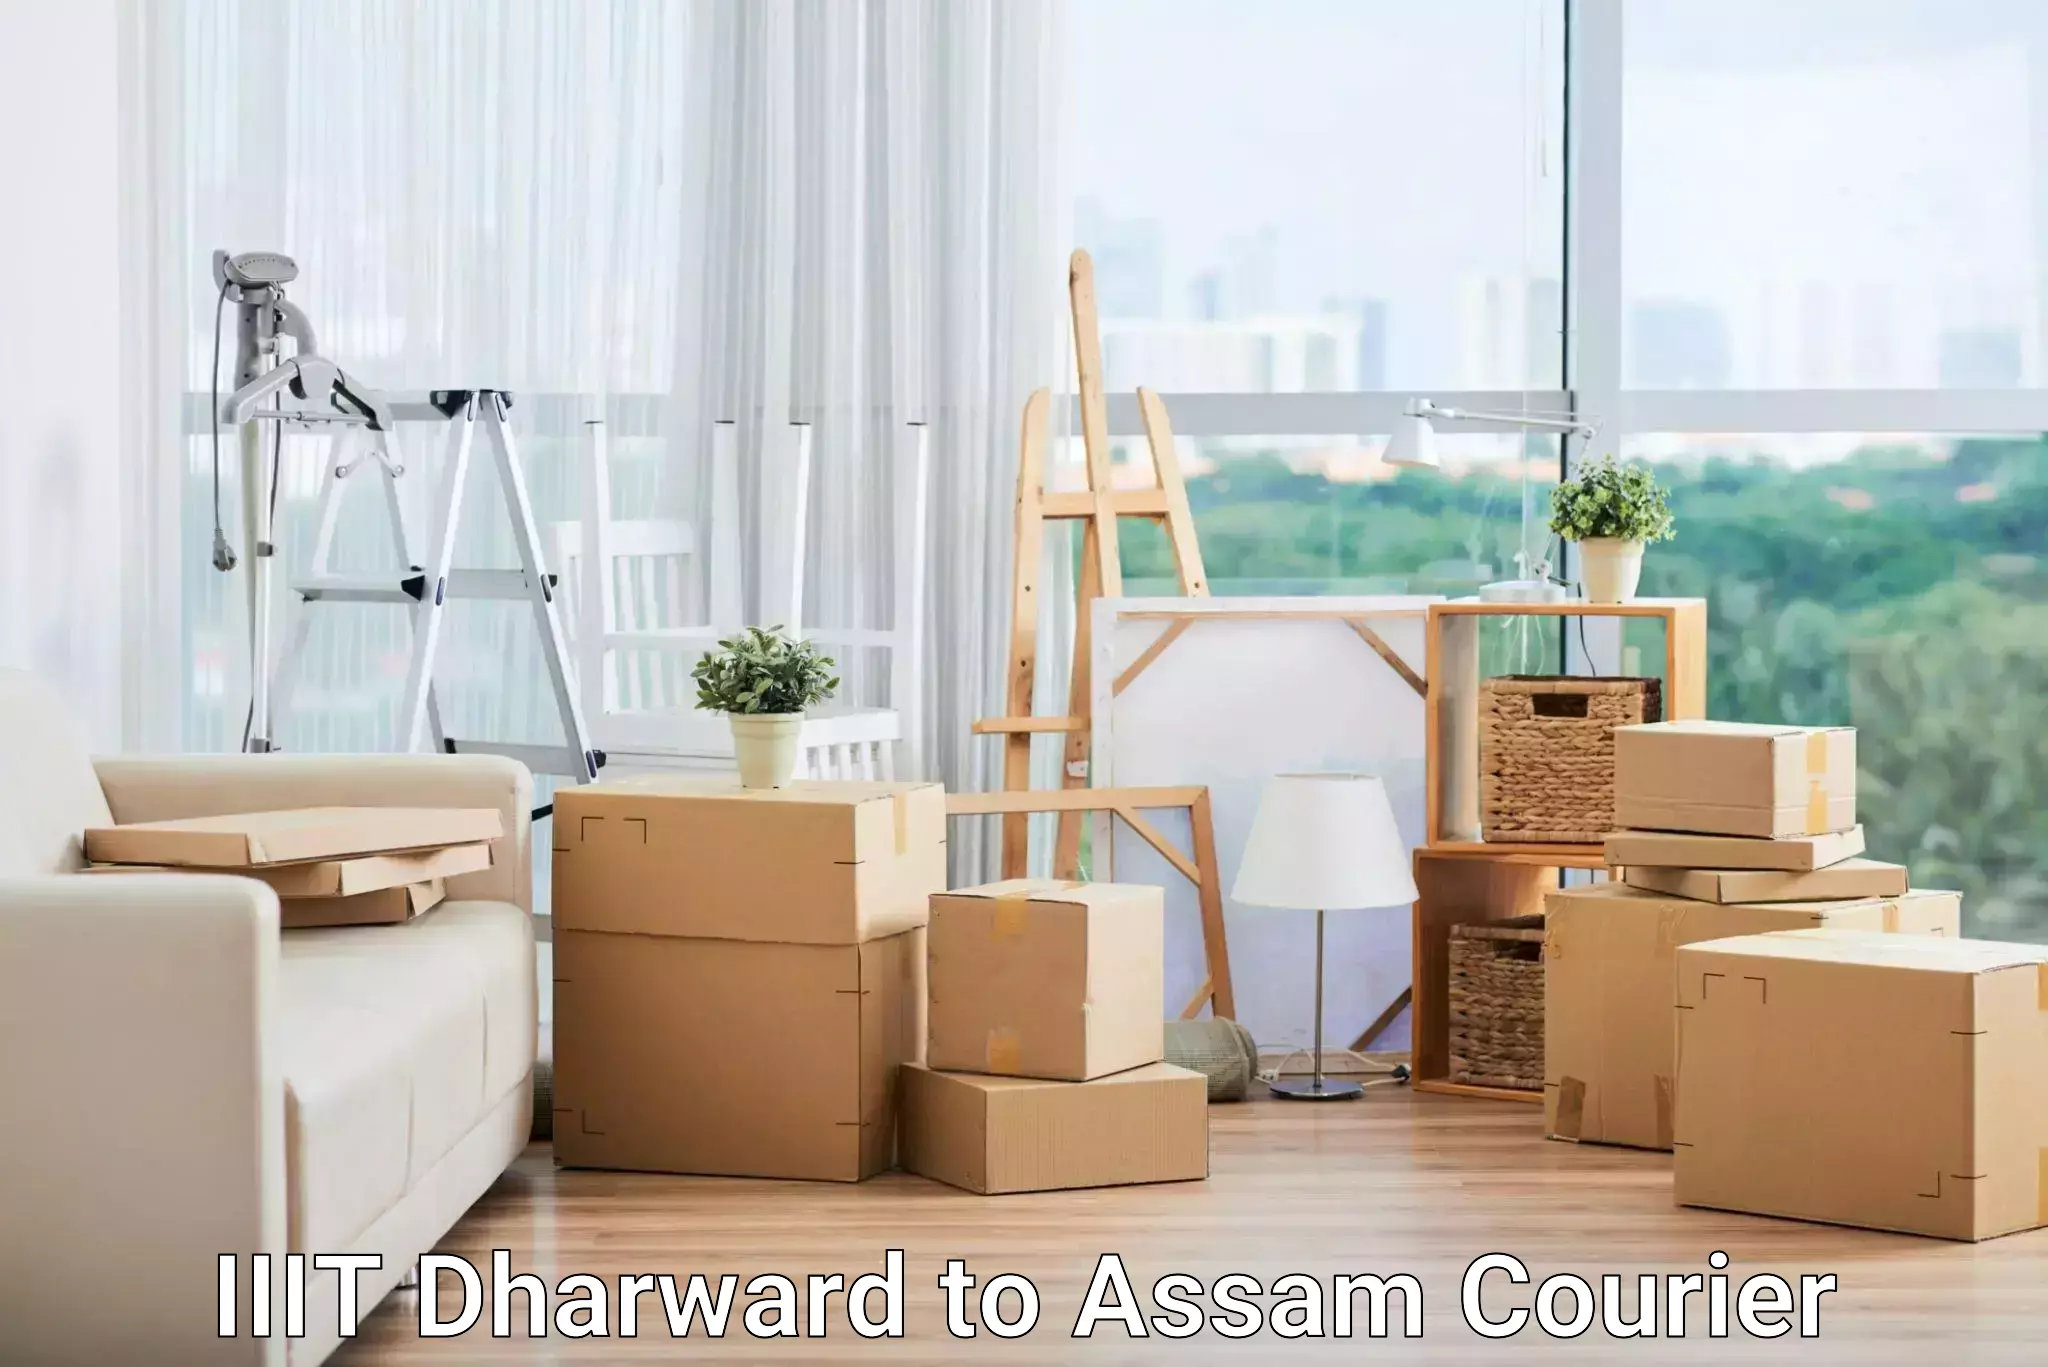 Same-day delivery options IIIT Dharward to Assam